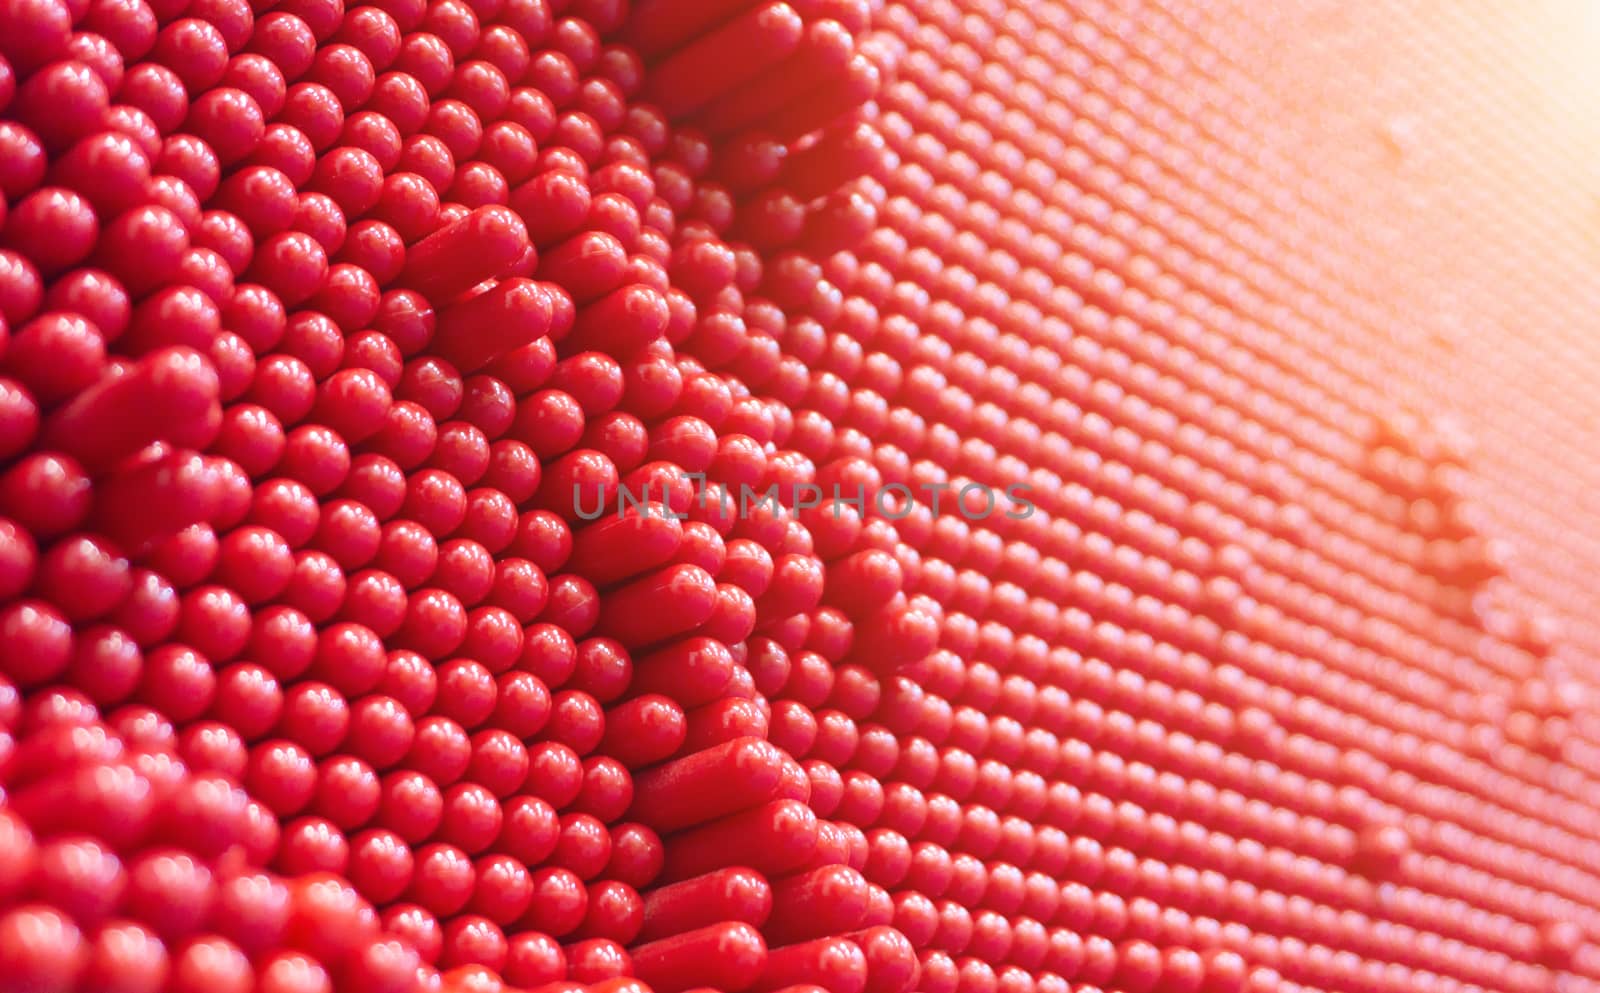 Abstract dots background in red colors. Red is the color of fire and blood, so it is associated with energy, war and danger.